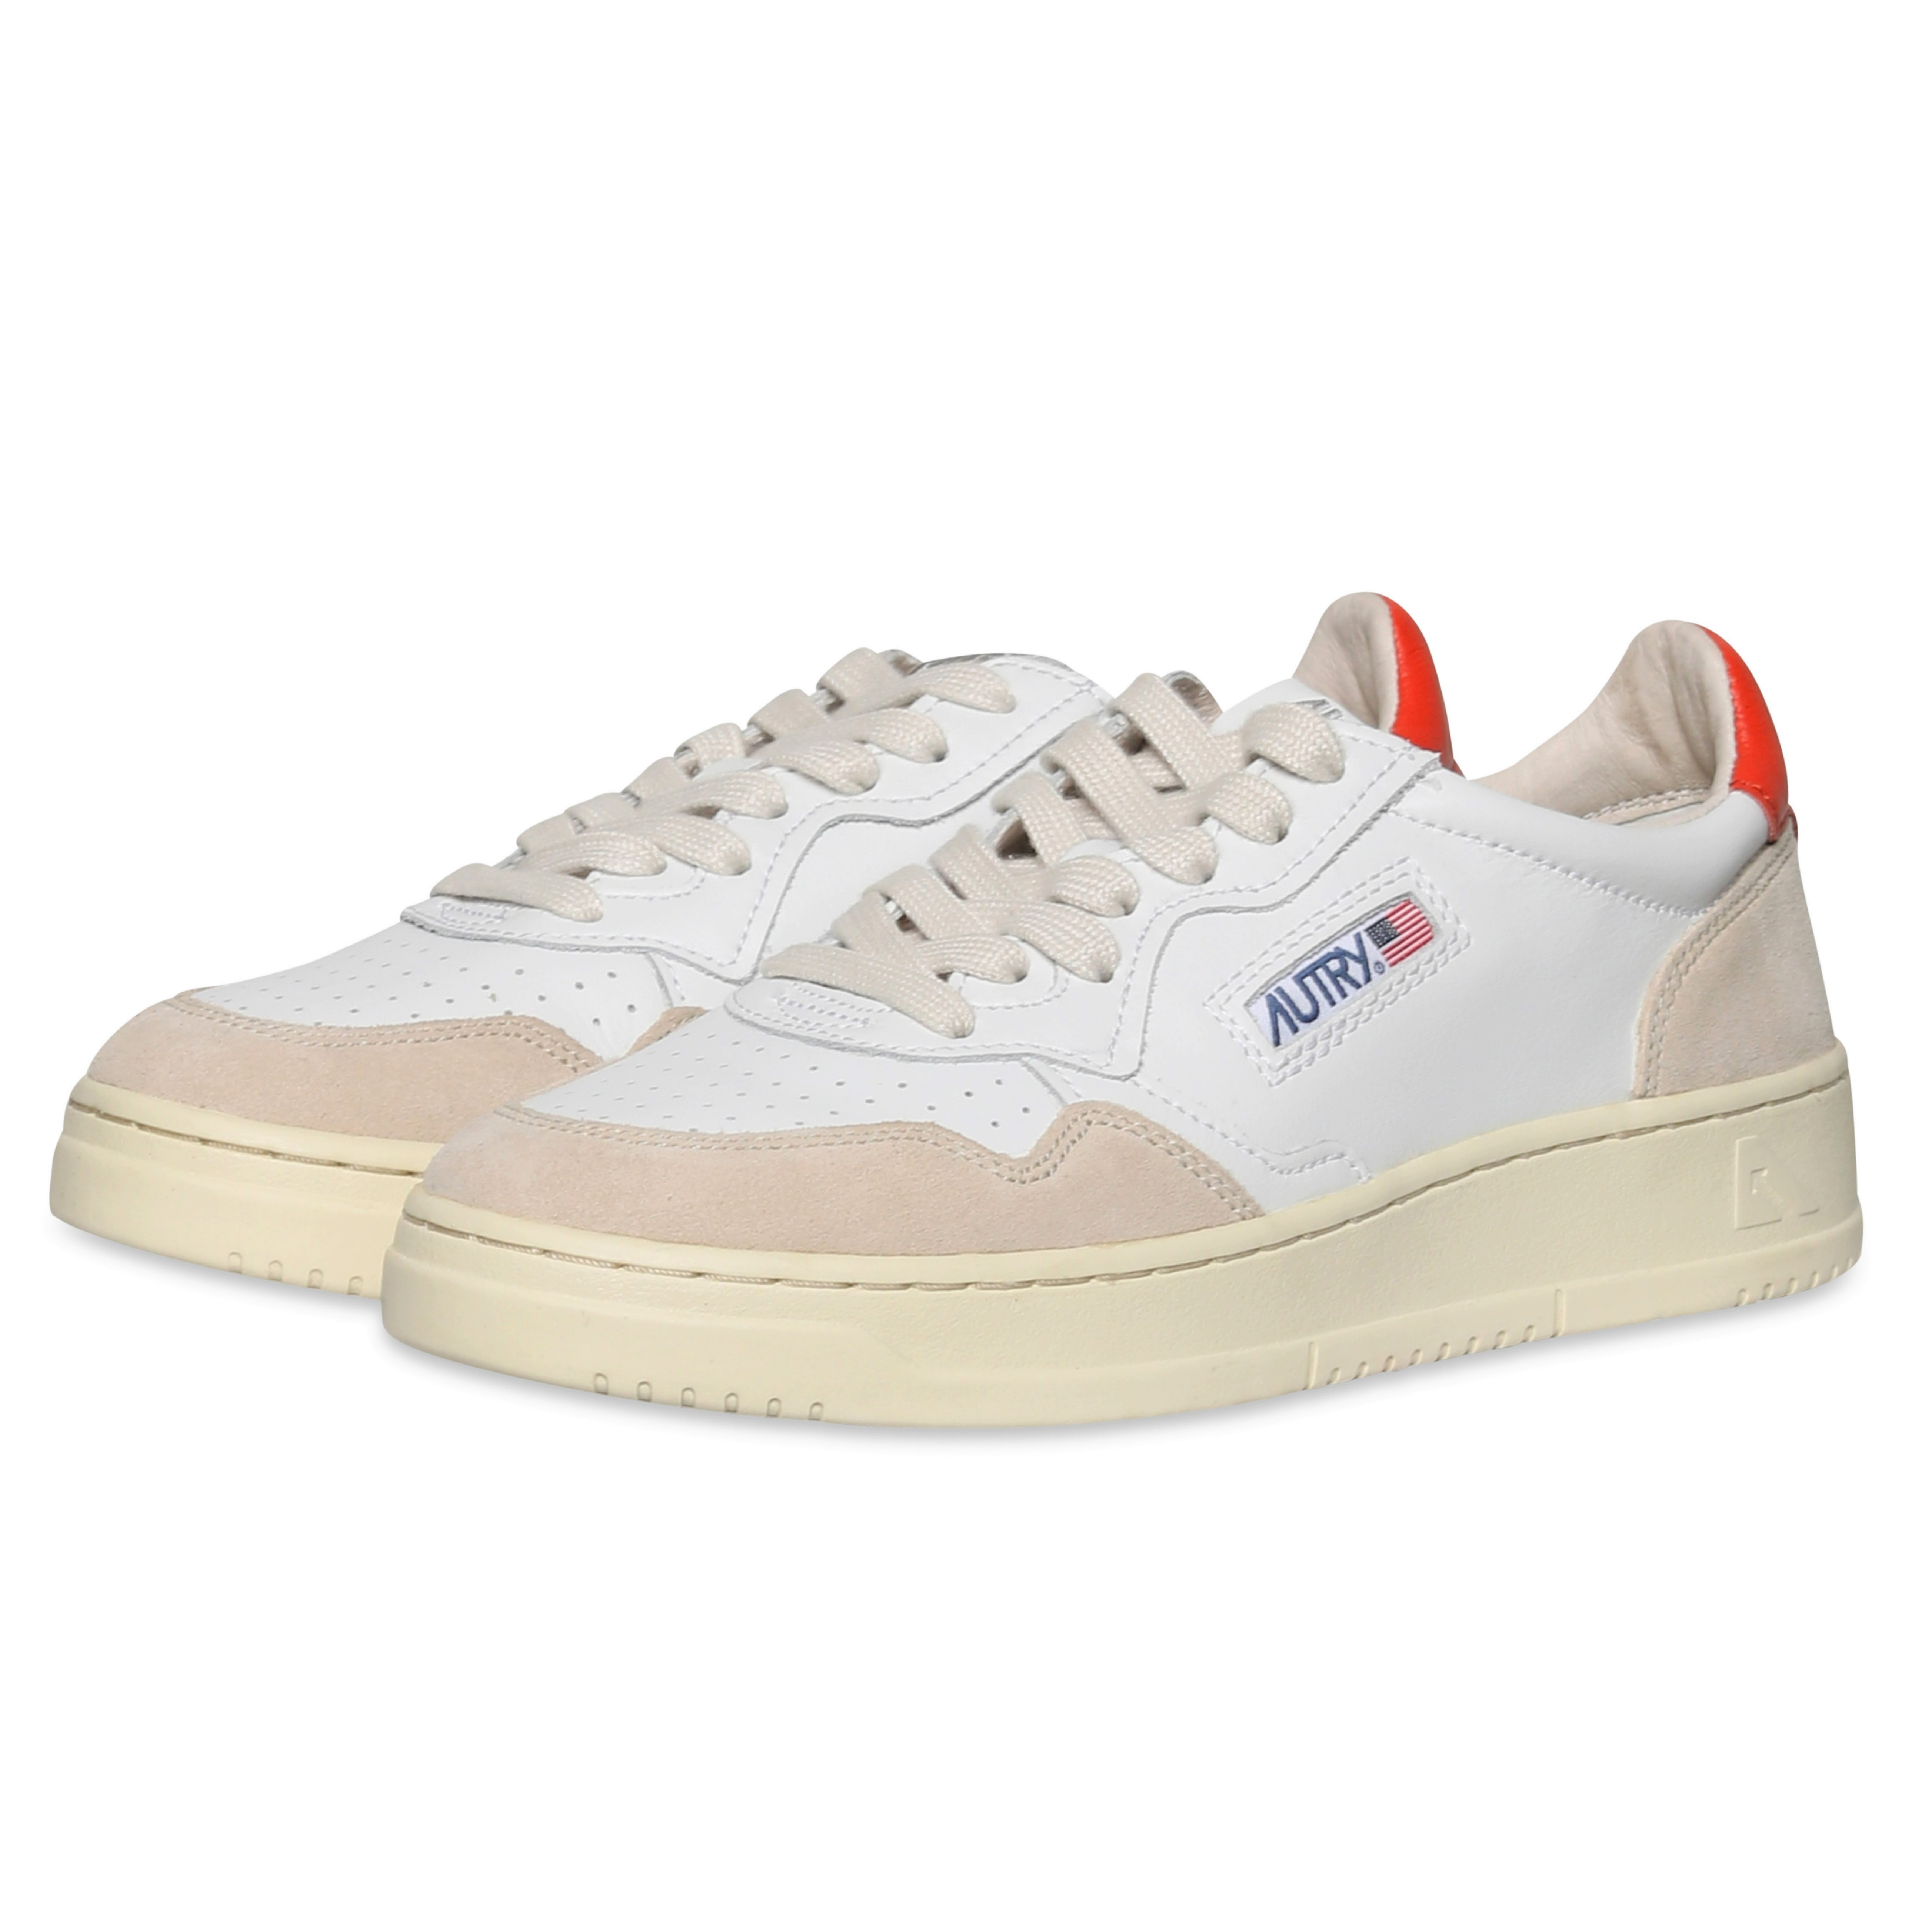 Autry Action Shoes Low Sneaker White/Suede/Orange 35